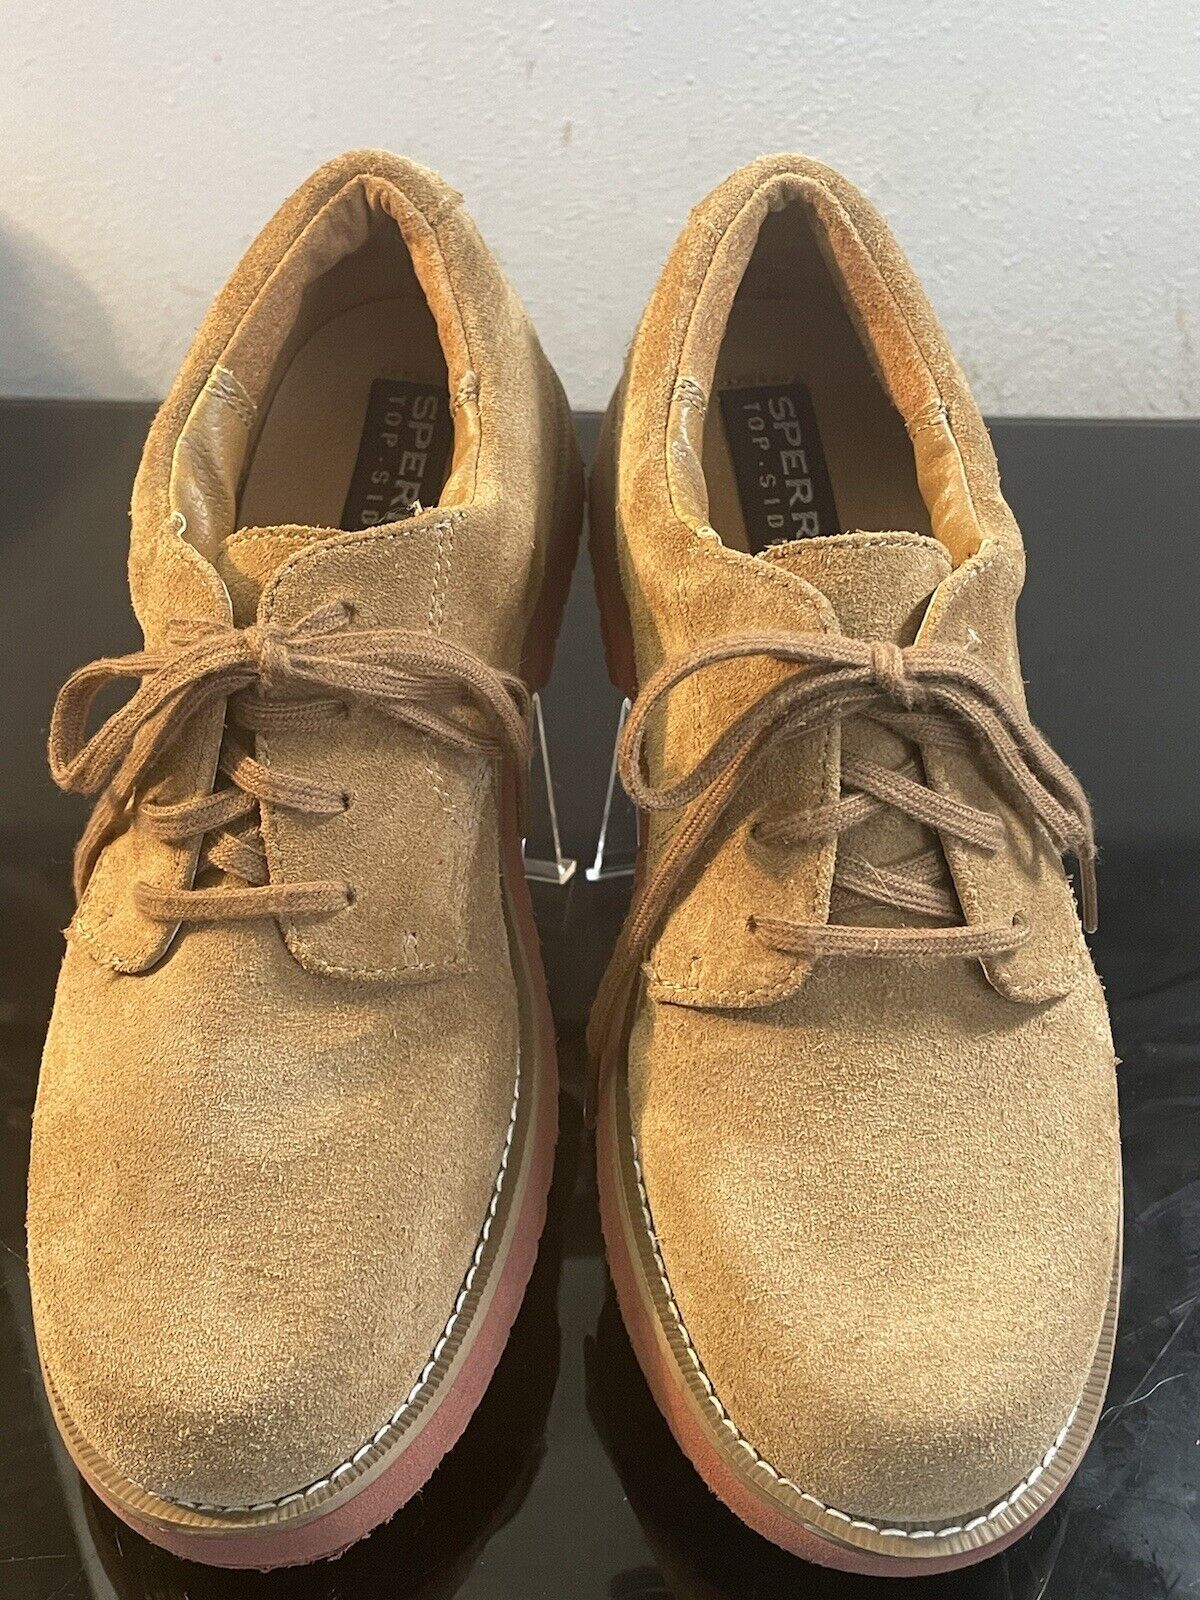 Sperry Top Sider Tevin Dress Shoe Suede Leather Tan Oxford Boys Size 2.5M - $23.06